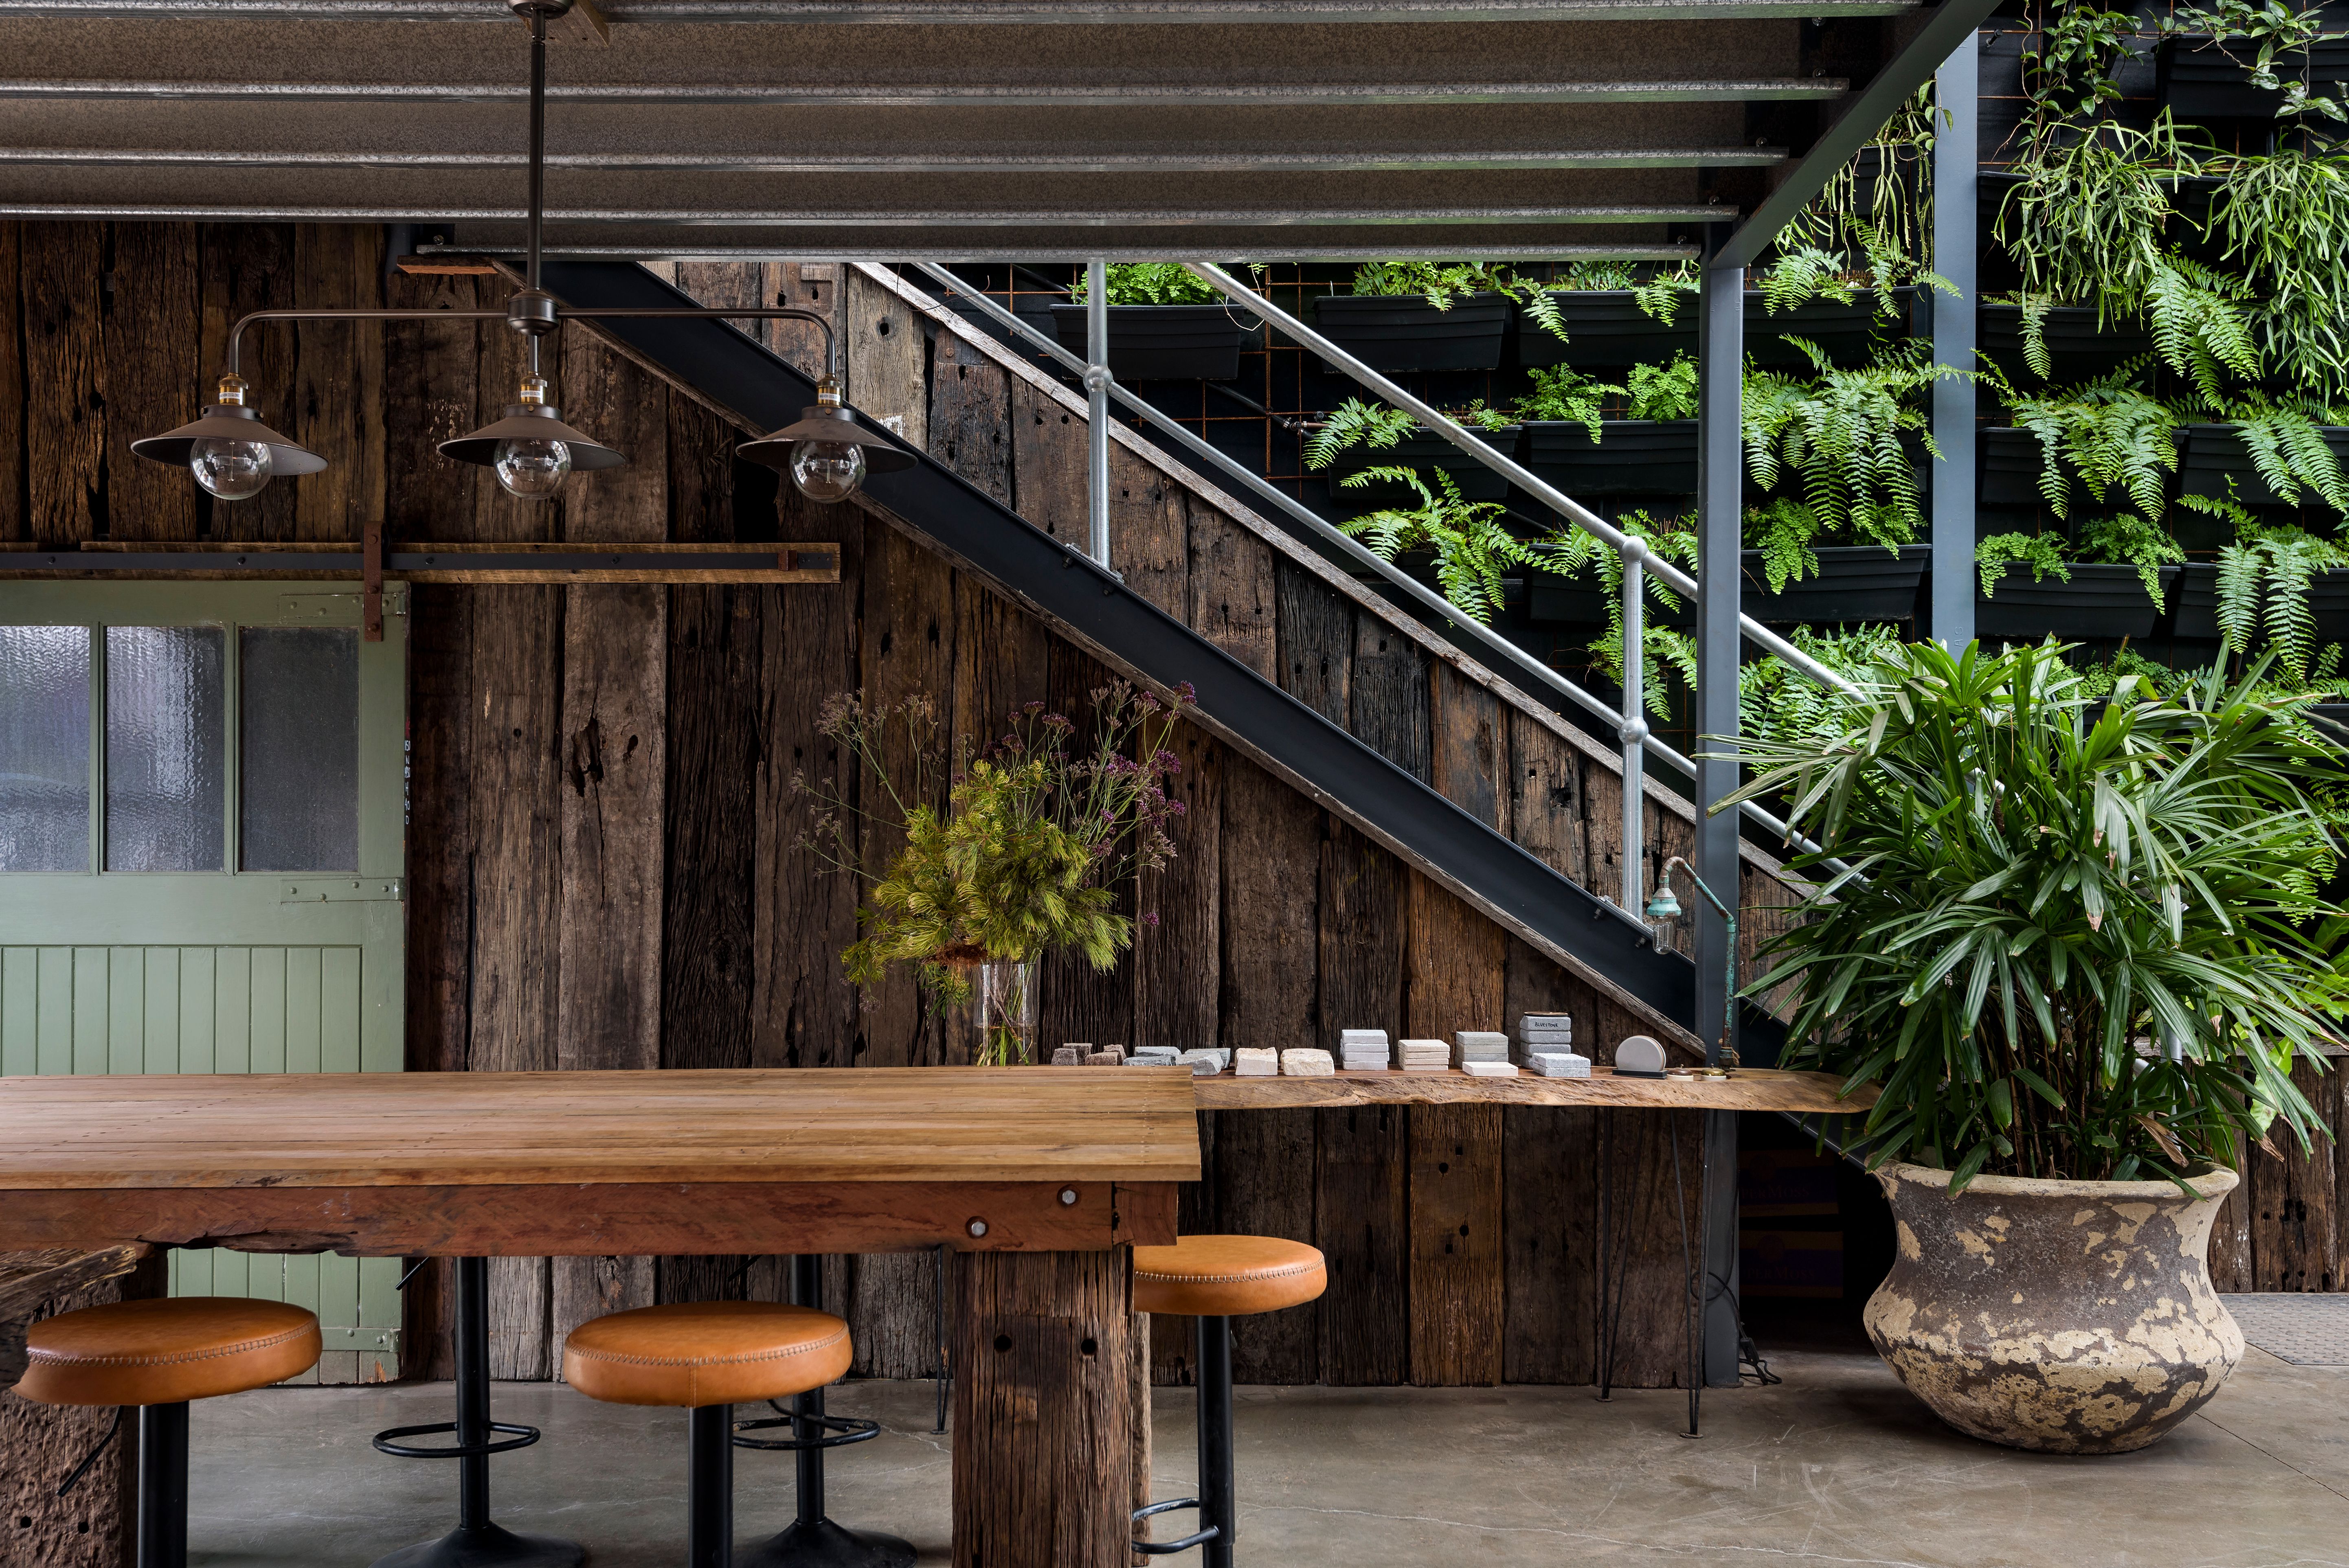 Interior fit-out and styling my Moss Boss Studios, with recycled railway sleeper cladding and green sliding barn door under stairs, custom-made timber tables, feature pot plant, vertical garden and rustic light fitting